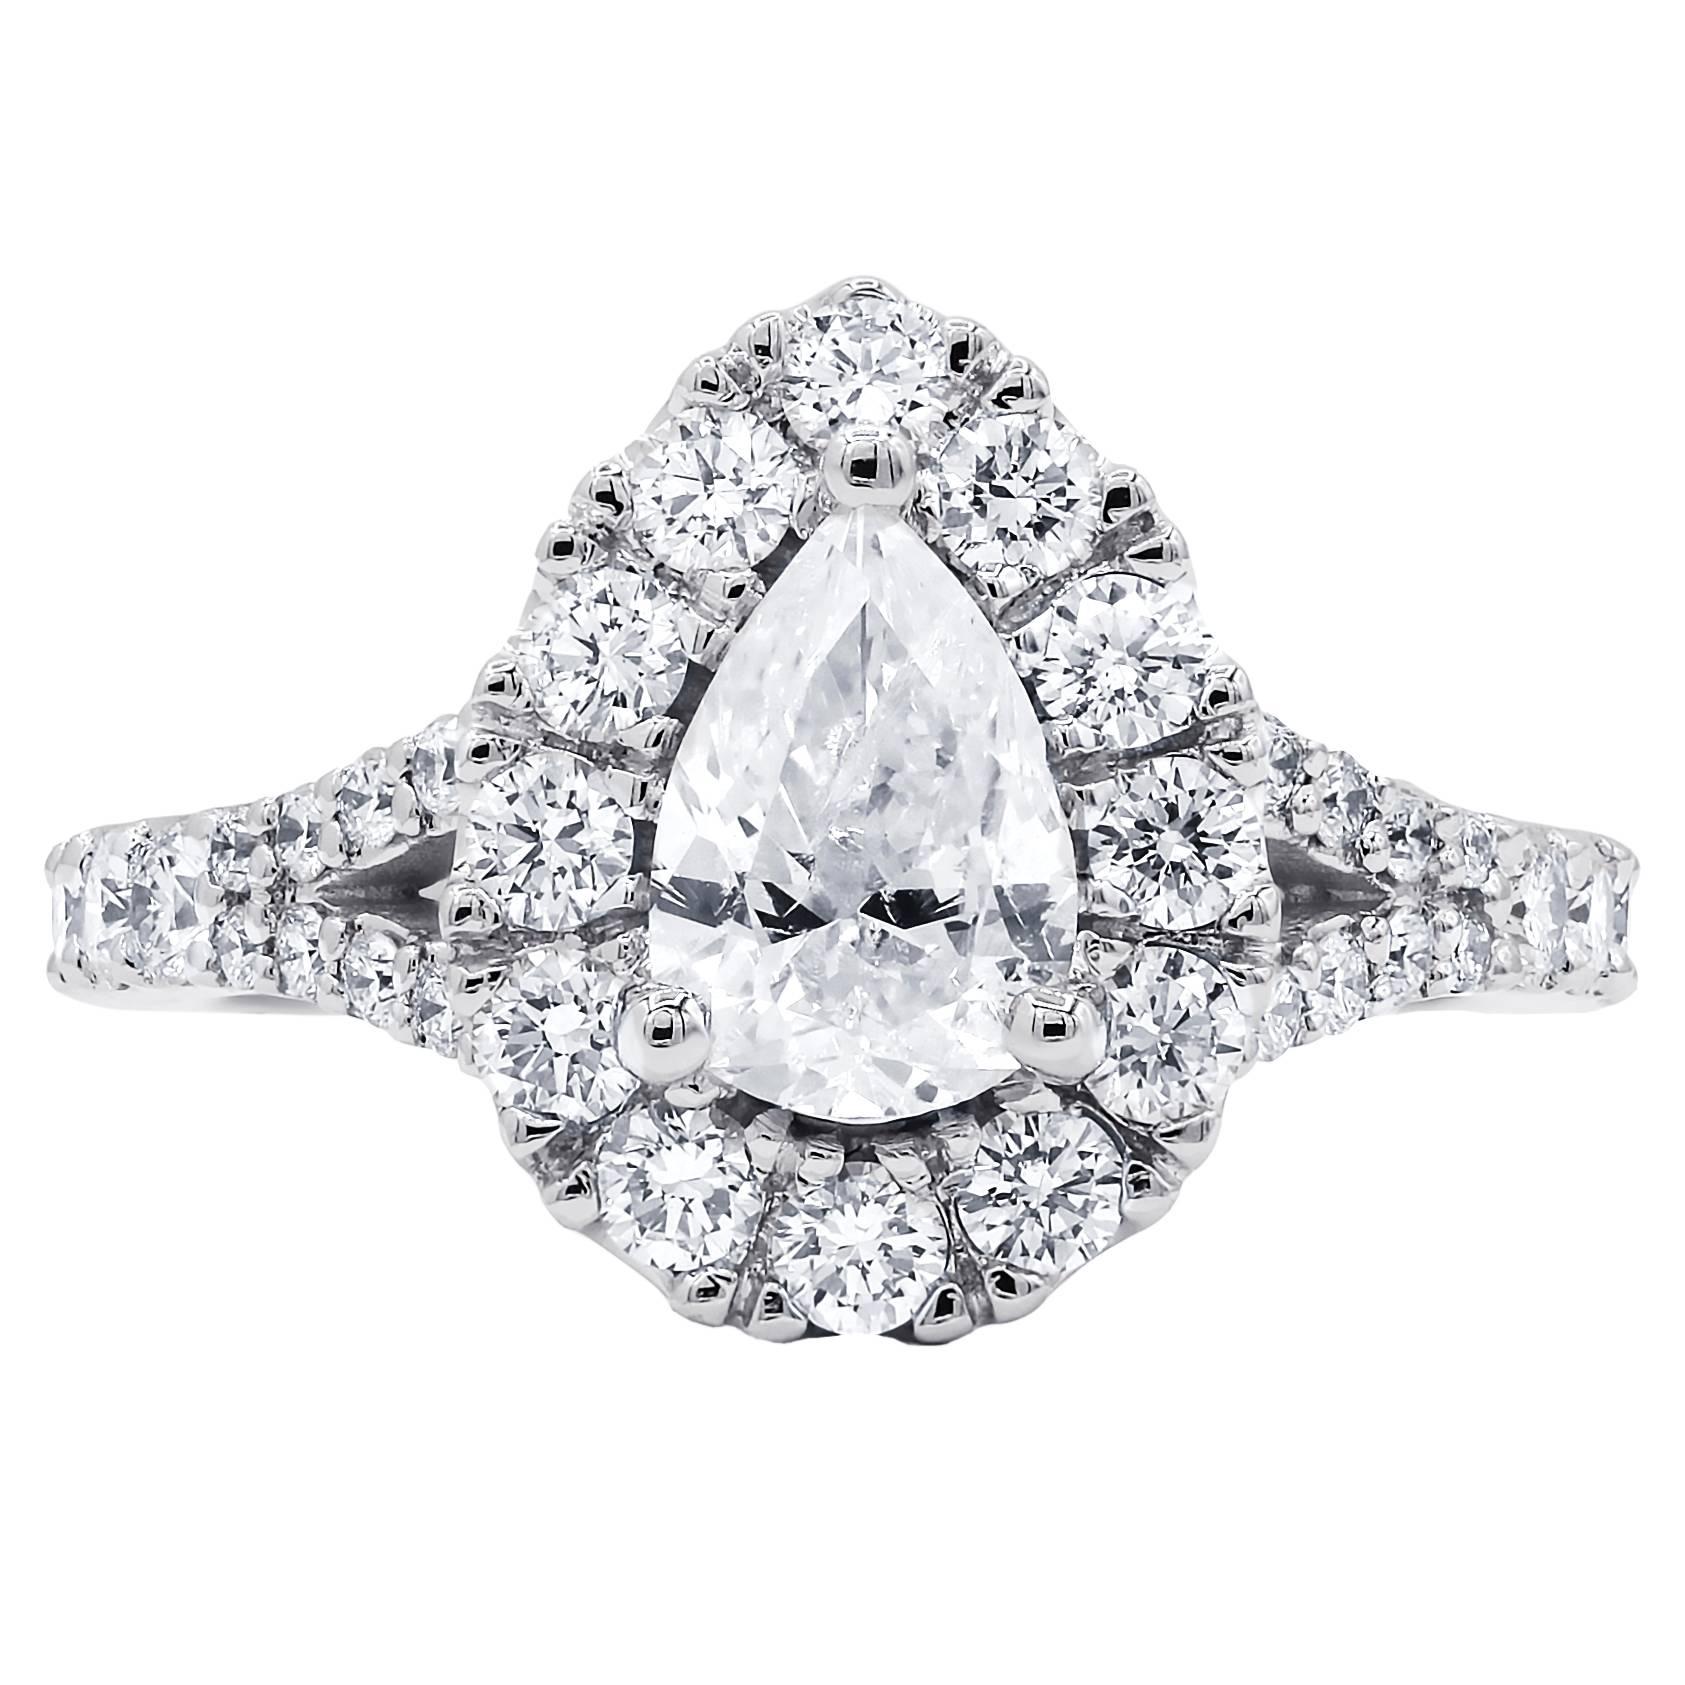 Certified 1.97 Carat Halo Pear Cut Diamond Ring For Sale